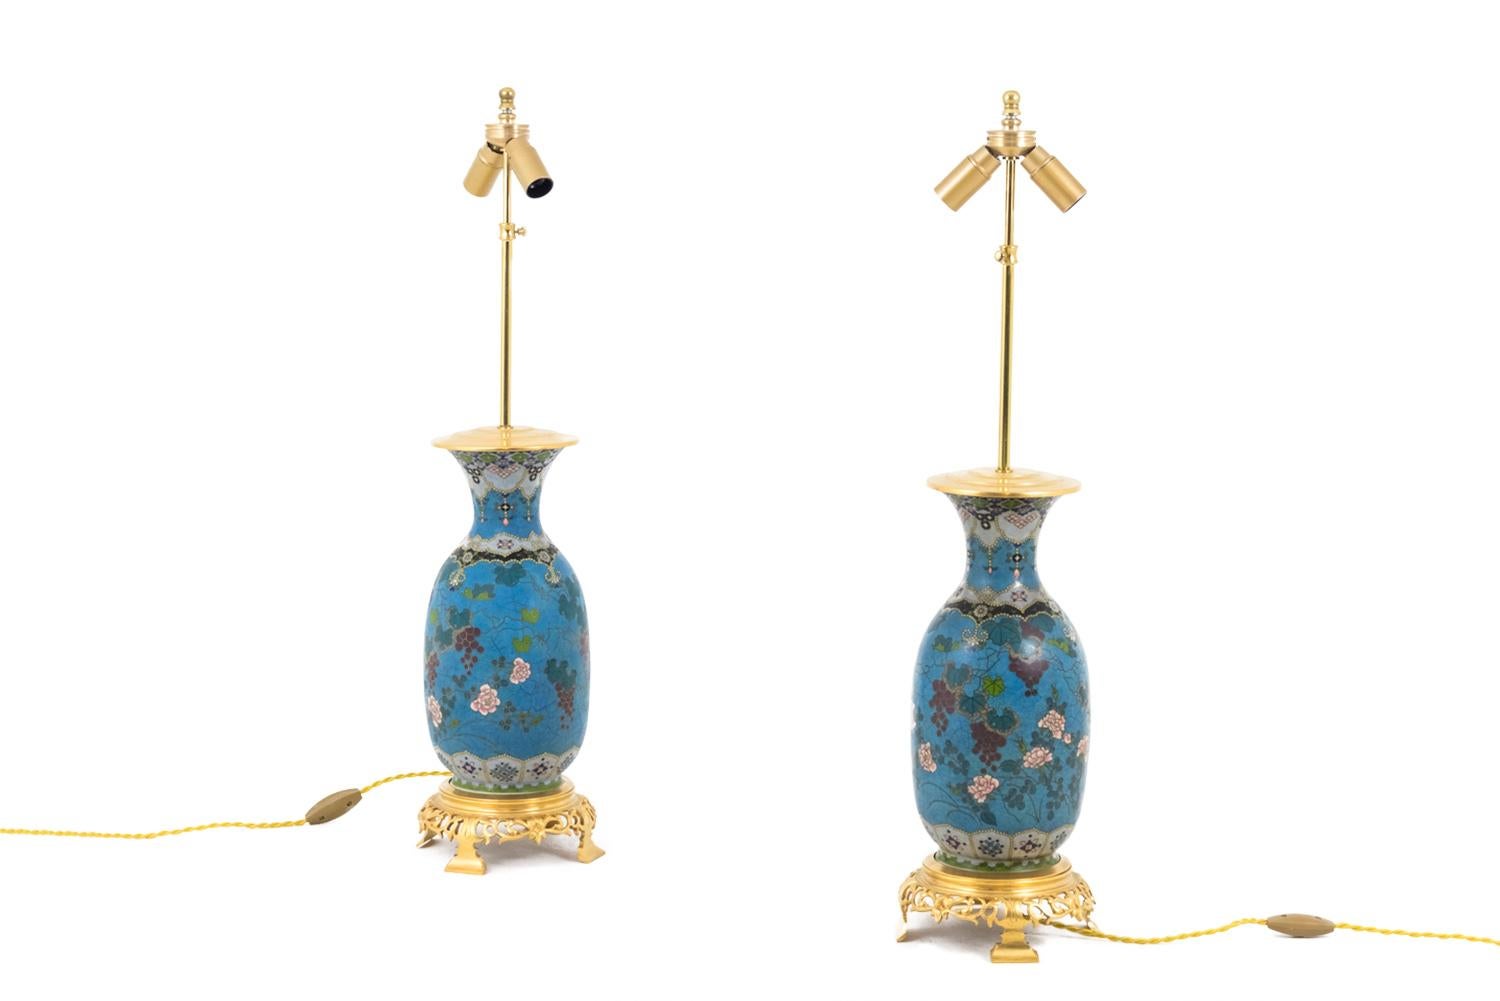 Pair of Amphora shaped Japanese porcelain lamps in cloisonné enamel and chiselled and gilt bronze mount, standing on a gilt bronze circular quadripod base with an openwork decor of foliage scrolls.
Body of the lamp in cloisonné enamel with a blue